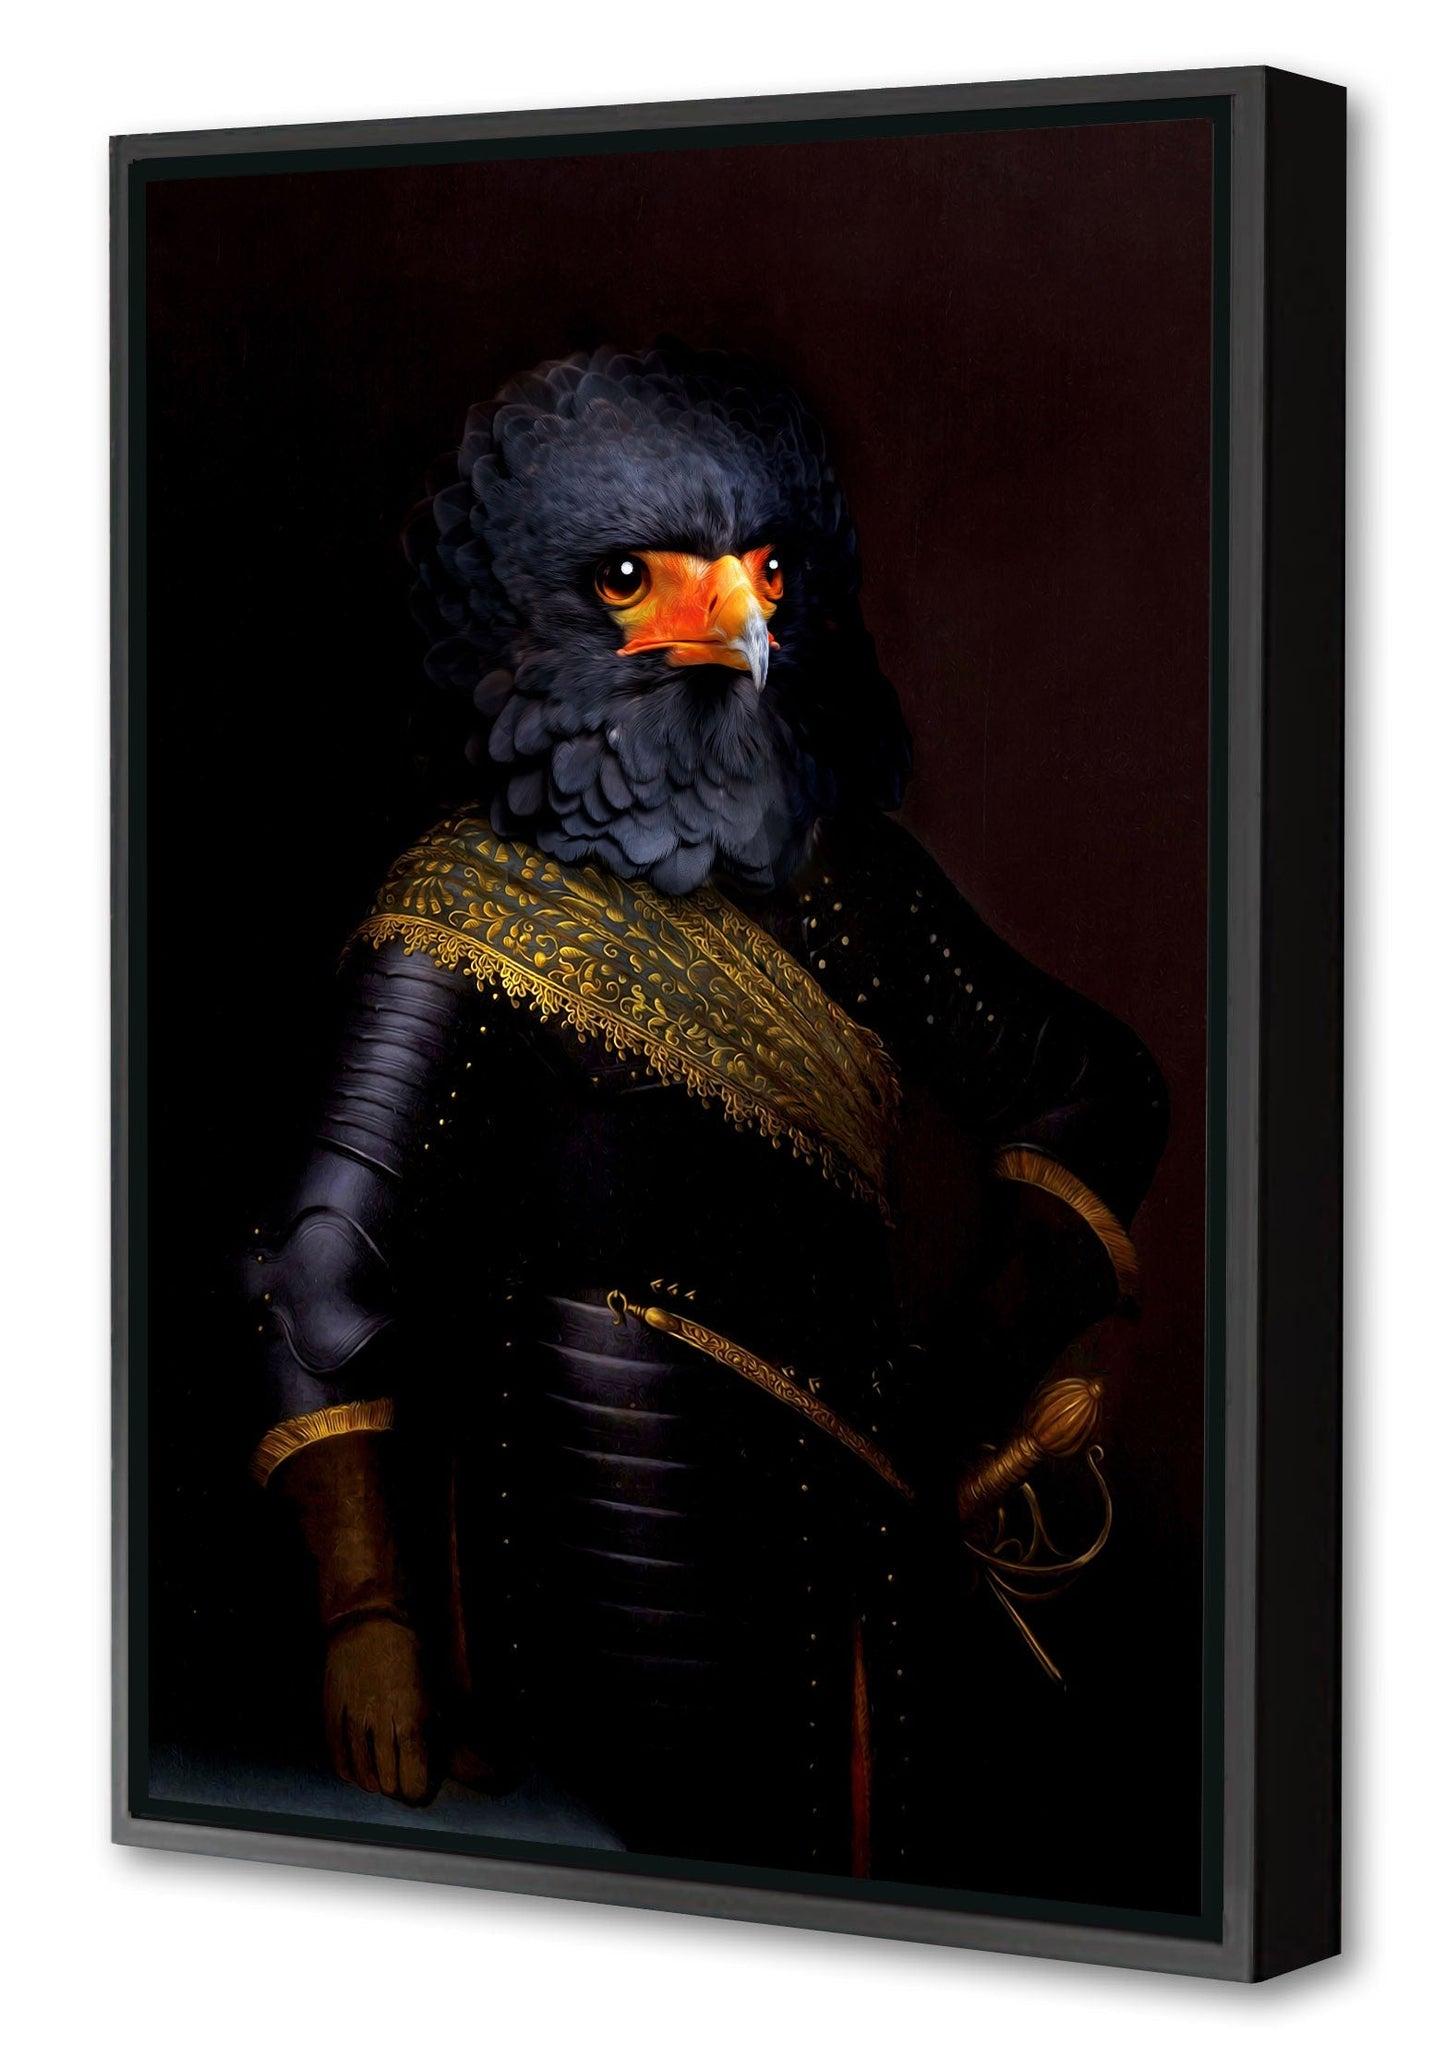 Connor-print, tein-lucasson-Canvas Print with Box Frame-40 x 60 cm-BLUE SHAKER